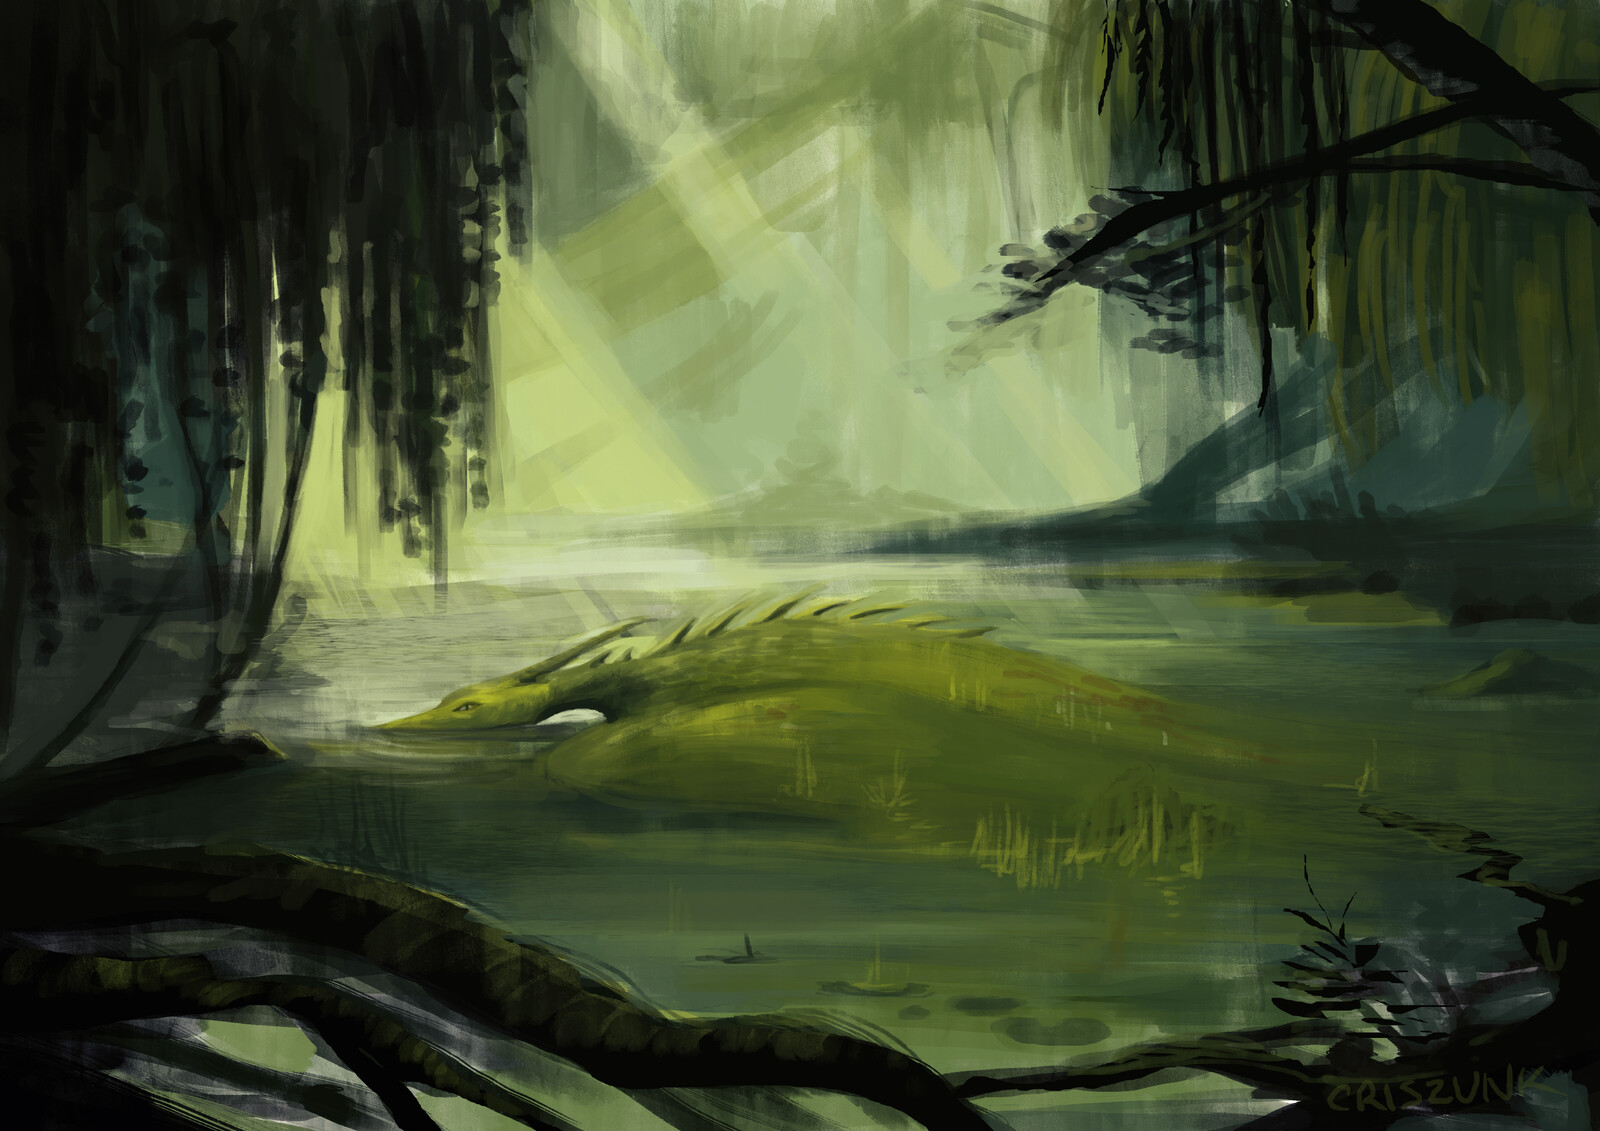 Creature design of a swamp dragon for the #Creatuanary challenge